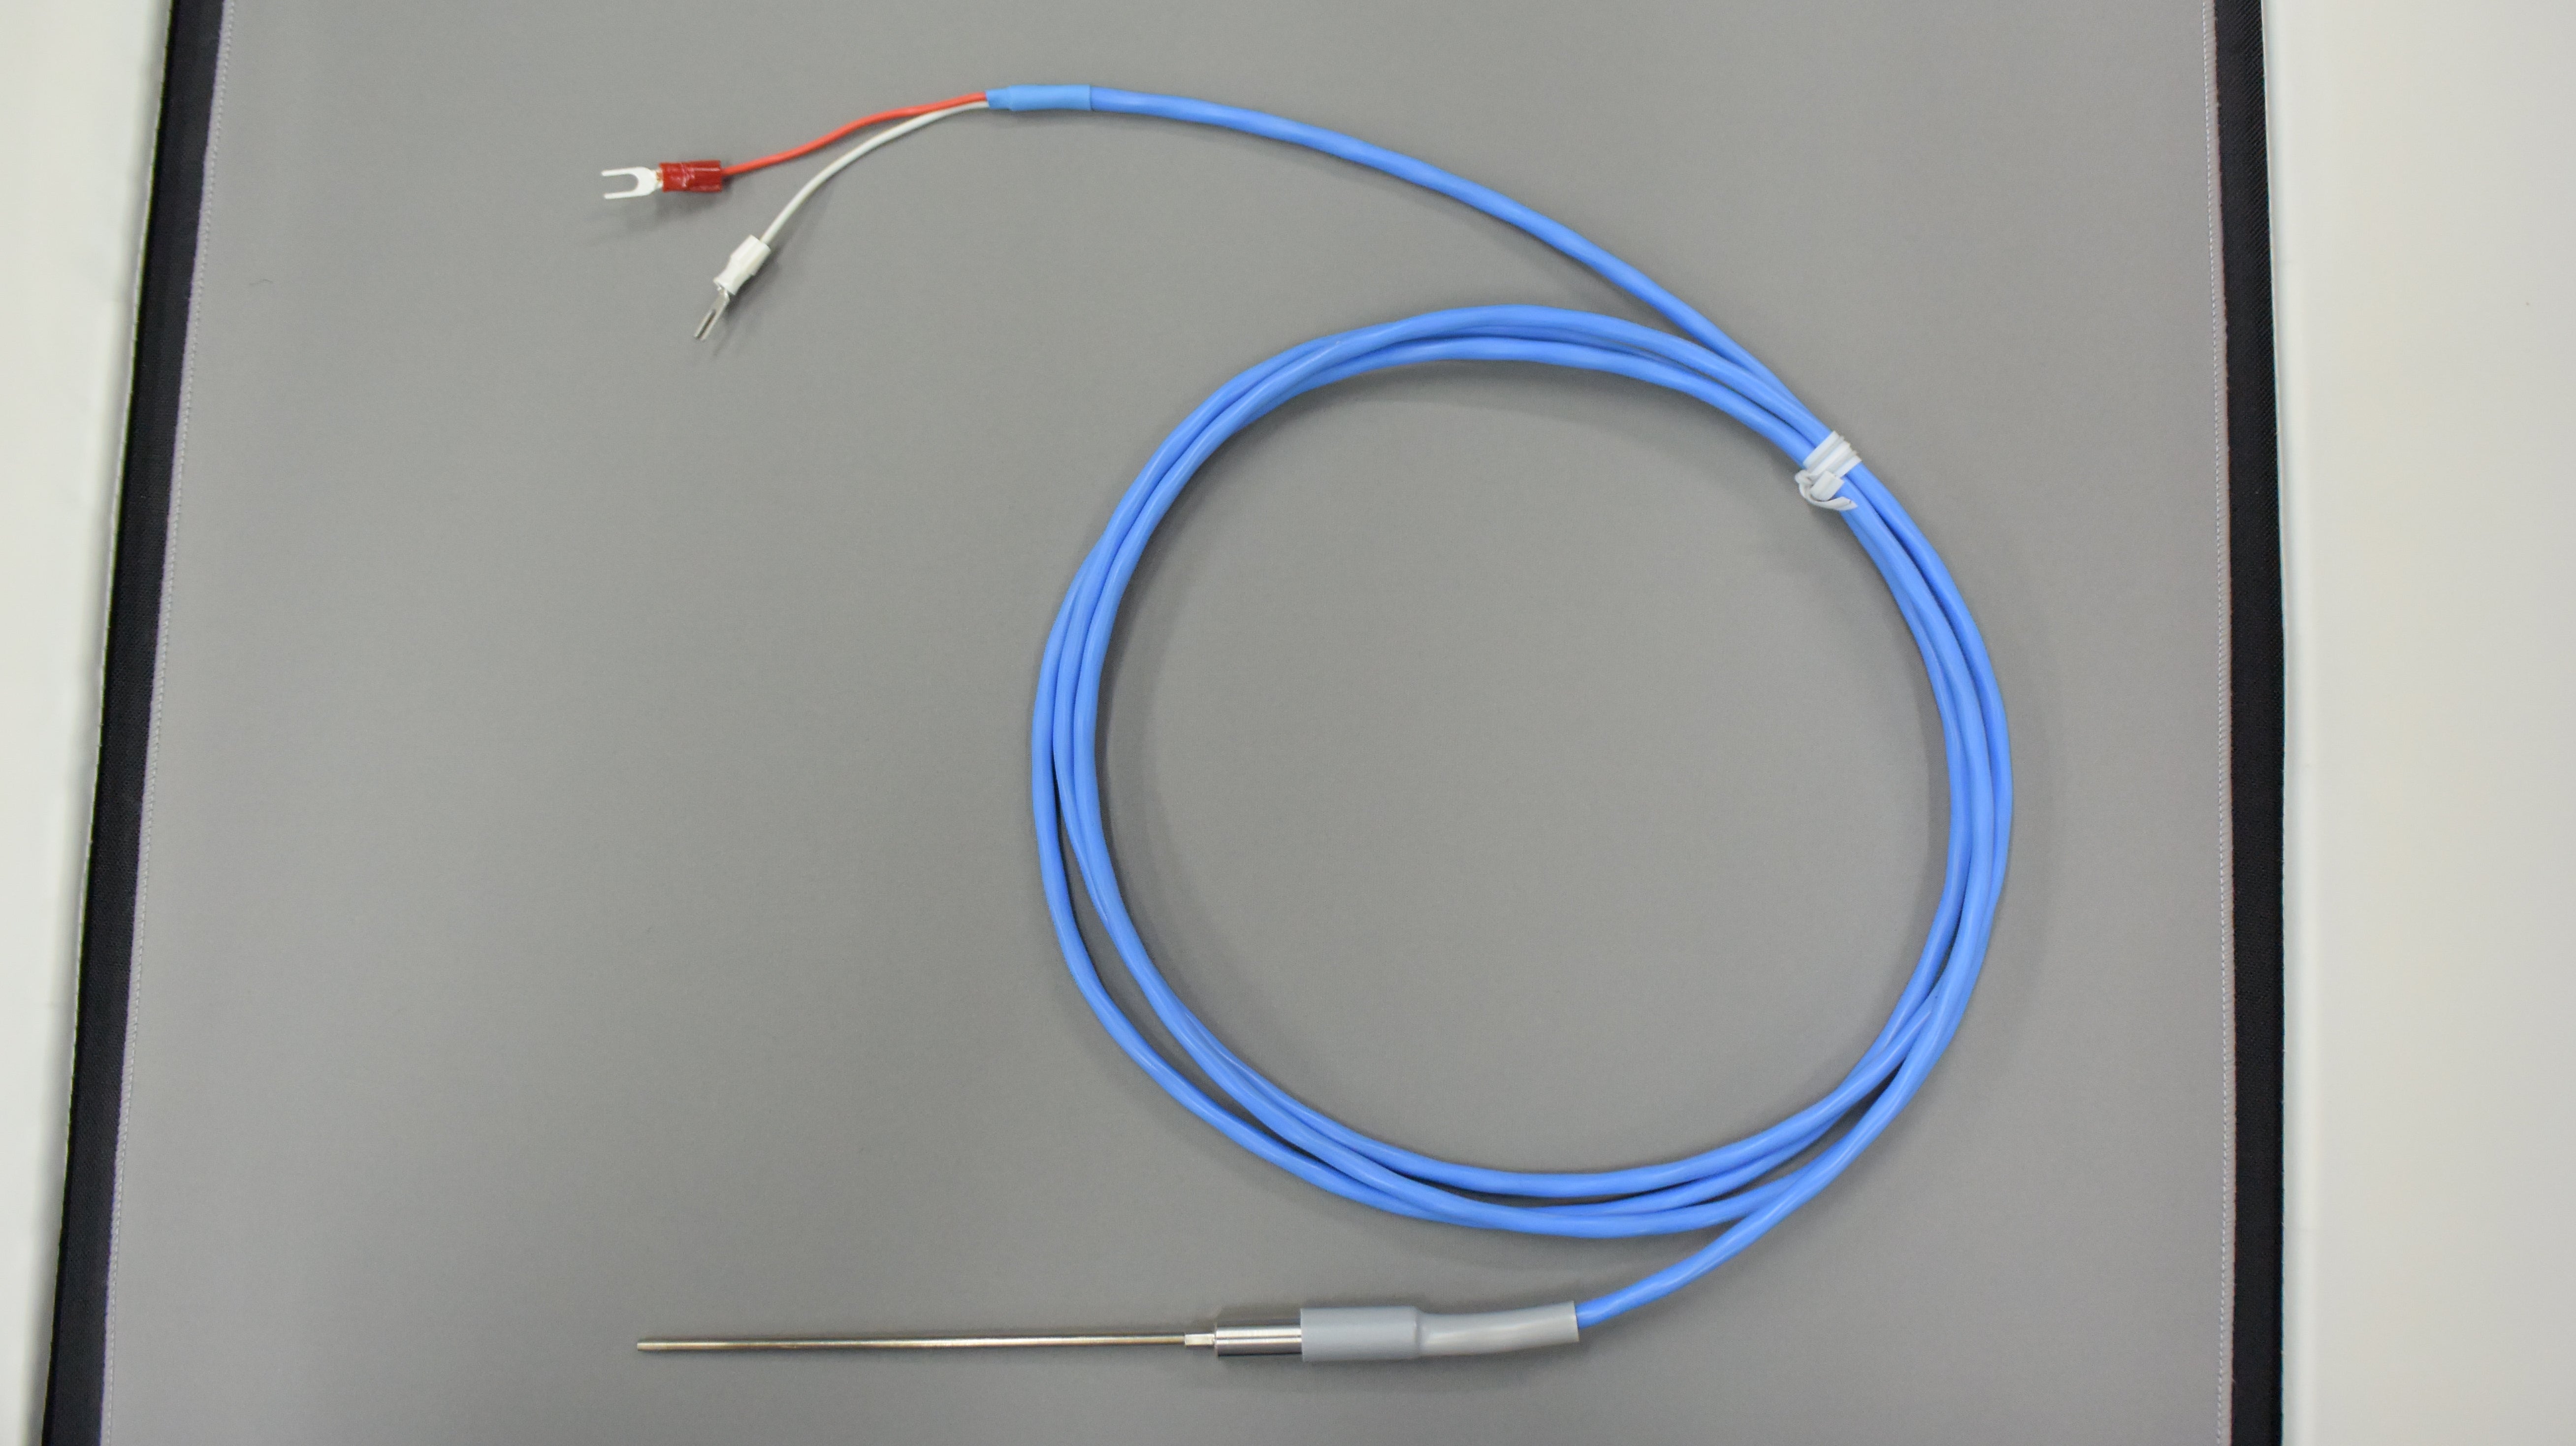 Thermocouple (Type K) "Sheathed Type" (silicone coated) Max. operating temp: 180°C (sleeve 80°C), Tolerance: Class 2 (±2.5°C or ±0.75%)